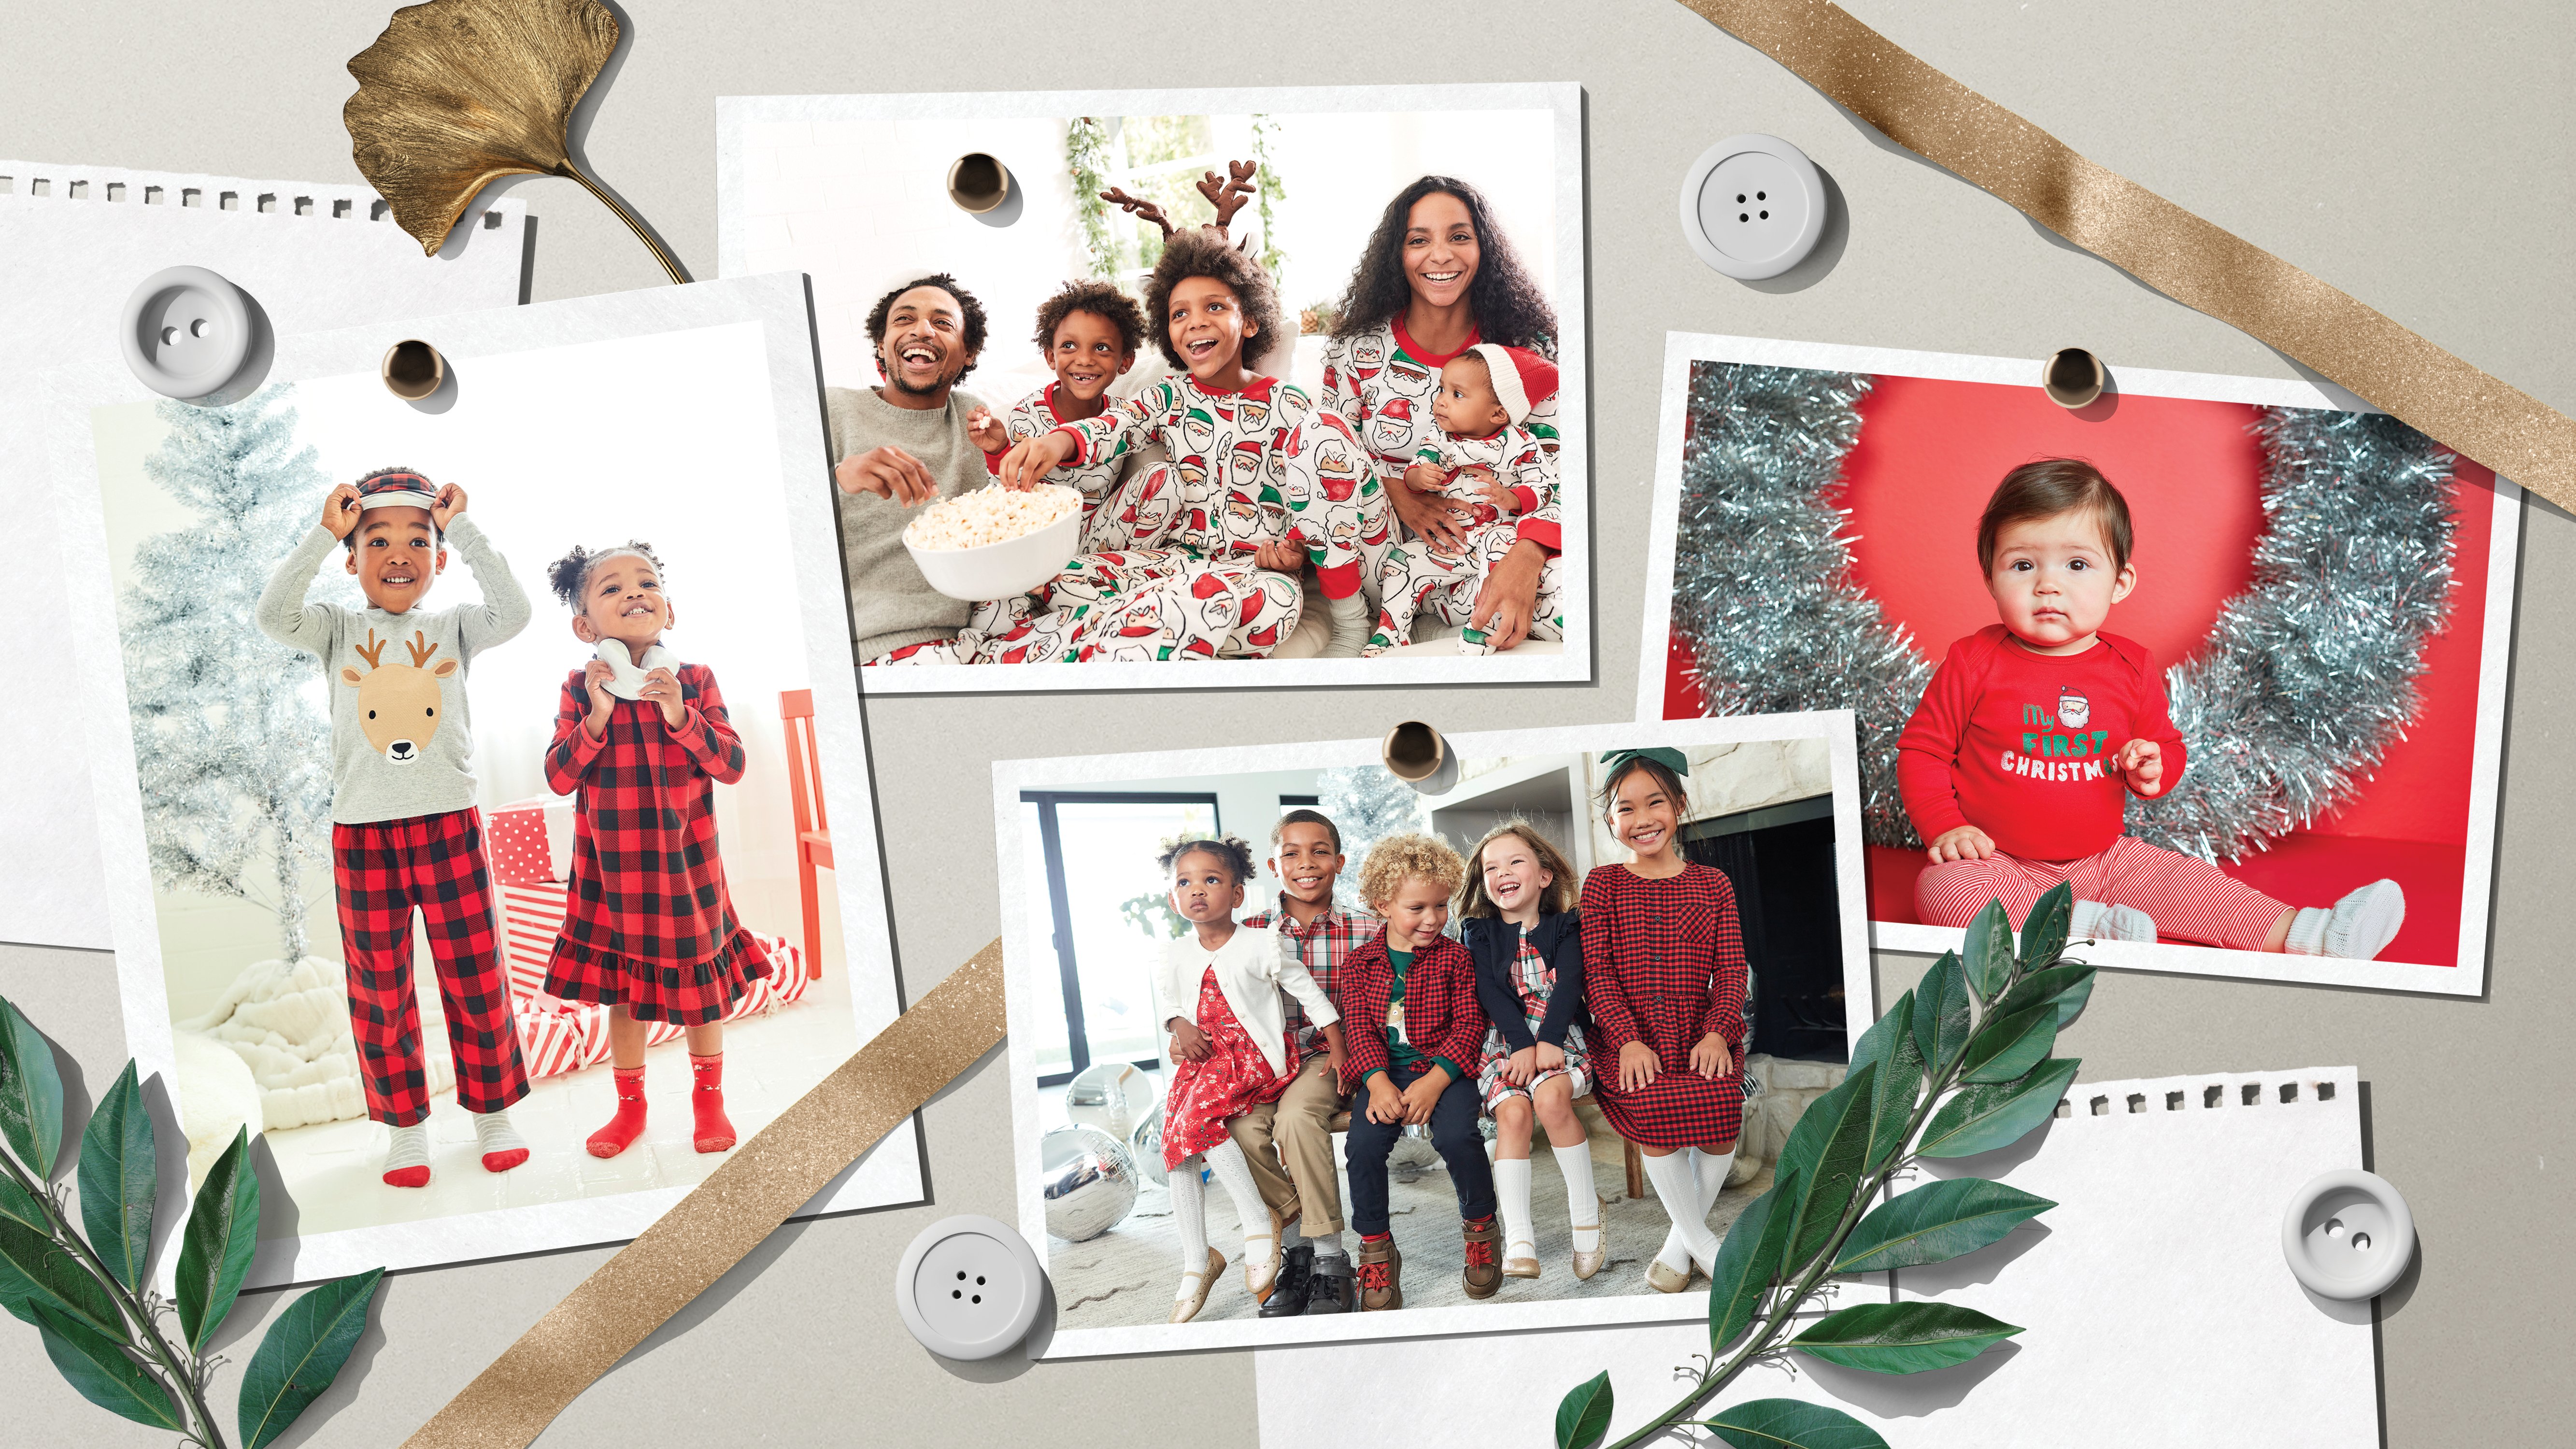 How to get iconic holiday photos at home